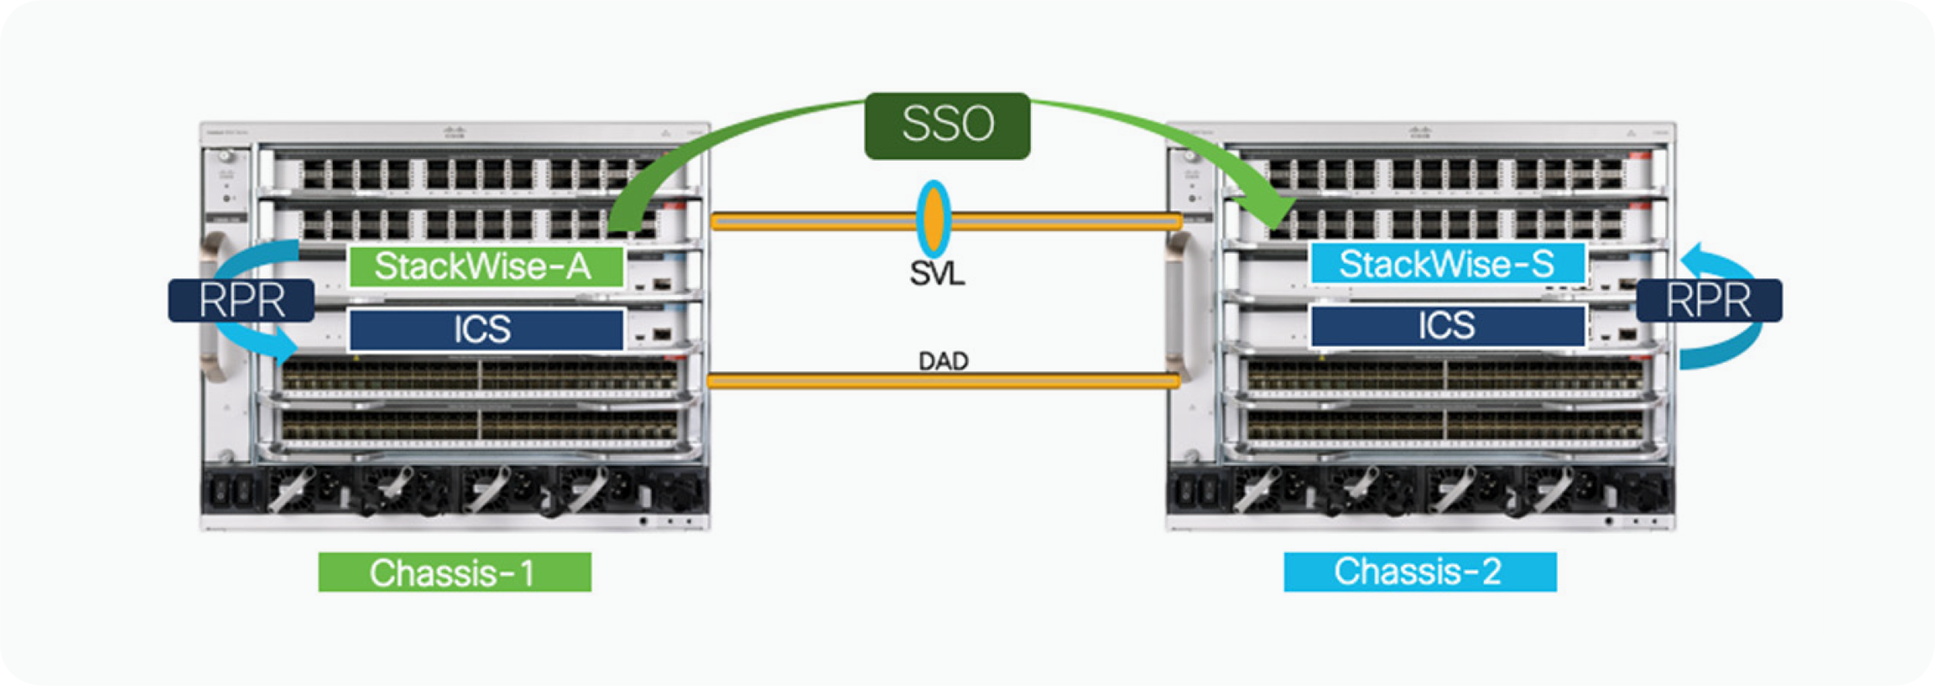 Products Cisco Catalyst 9000 Platform Stackwise Virtual White Paper Cisco